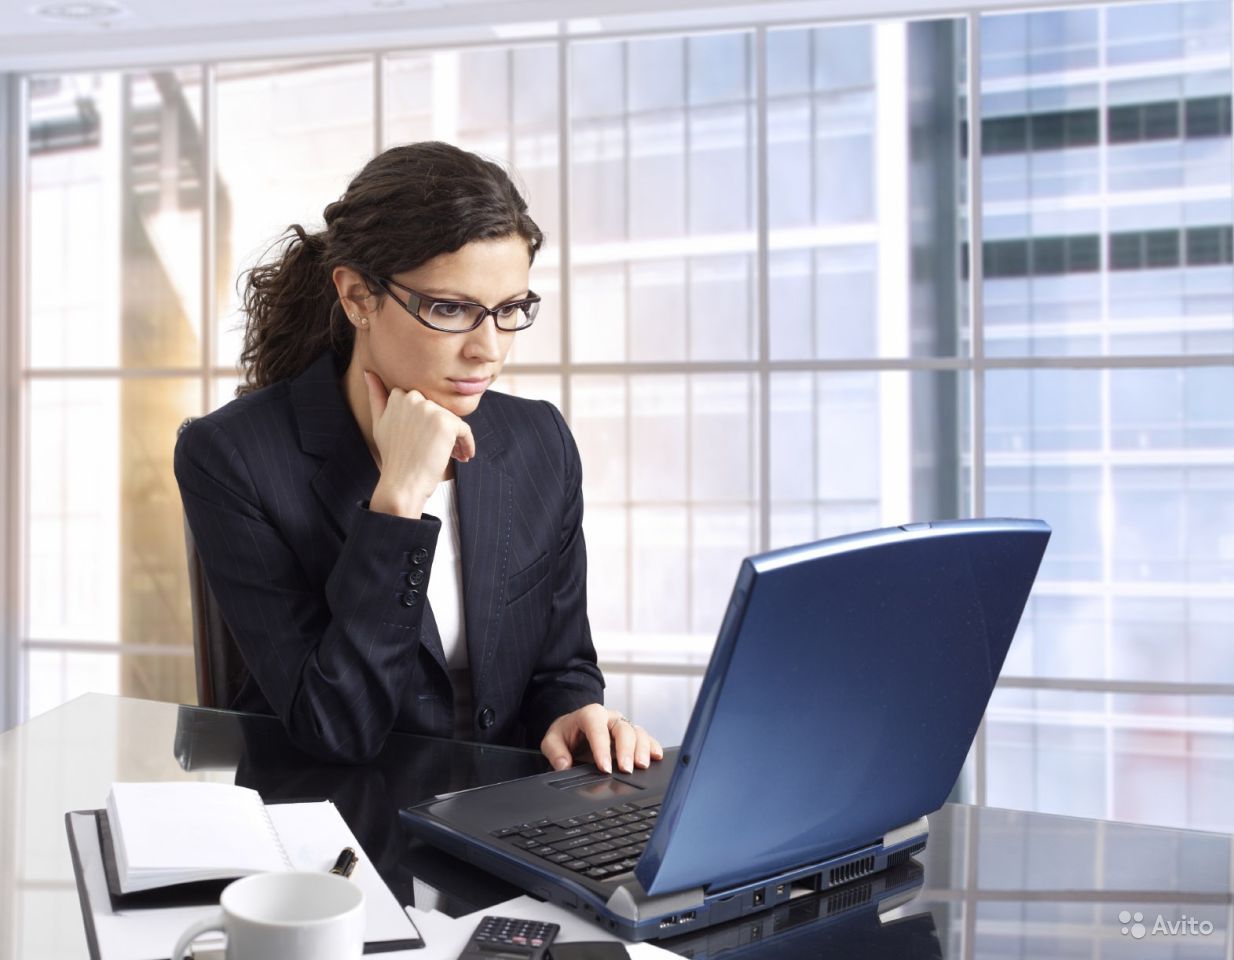 Woman on computer in office